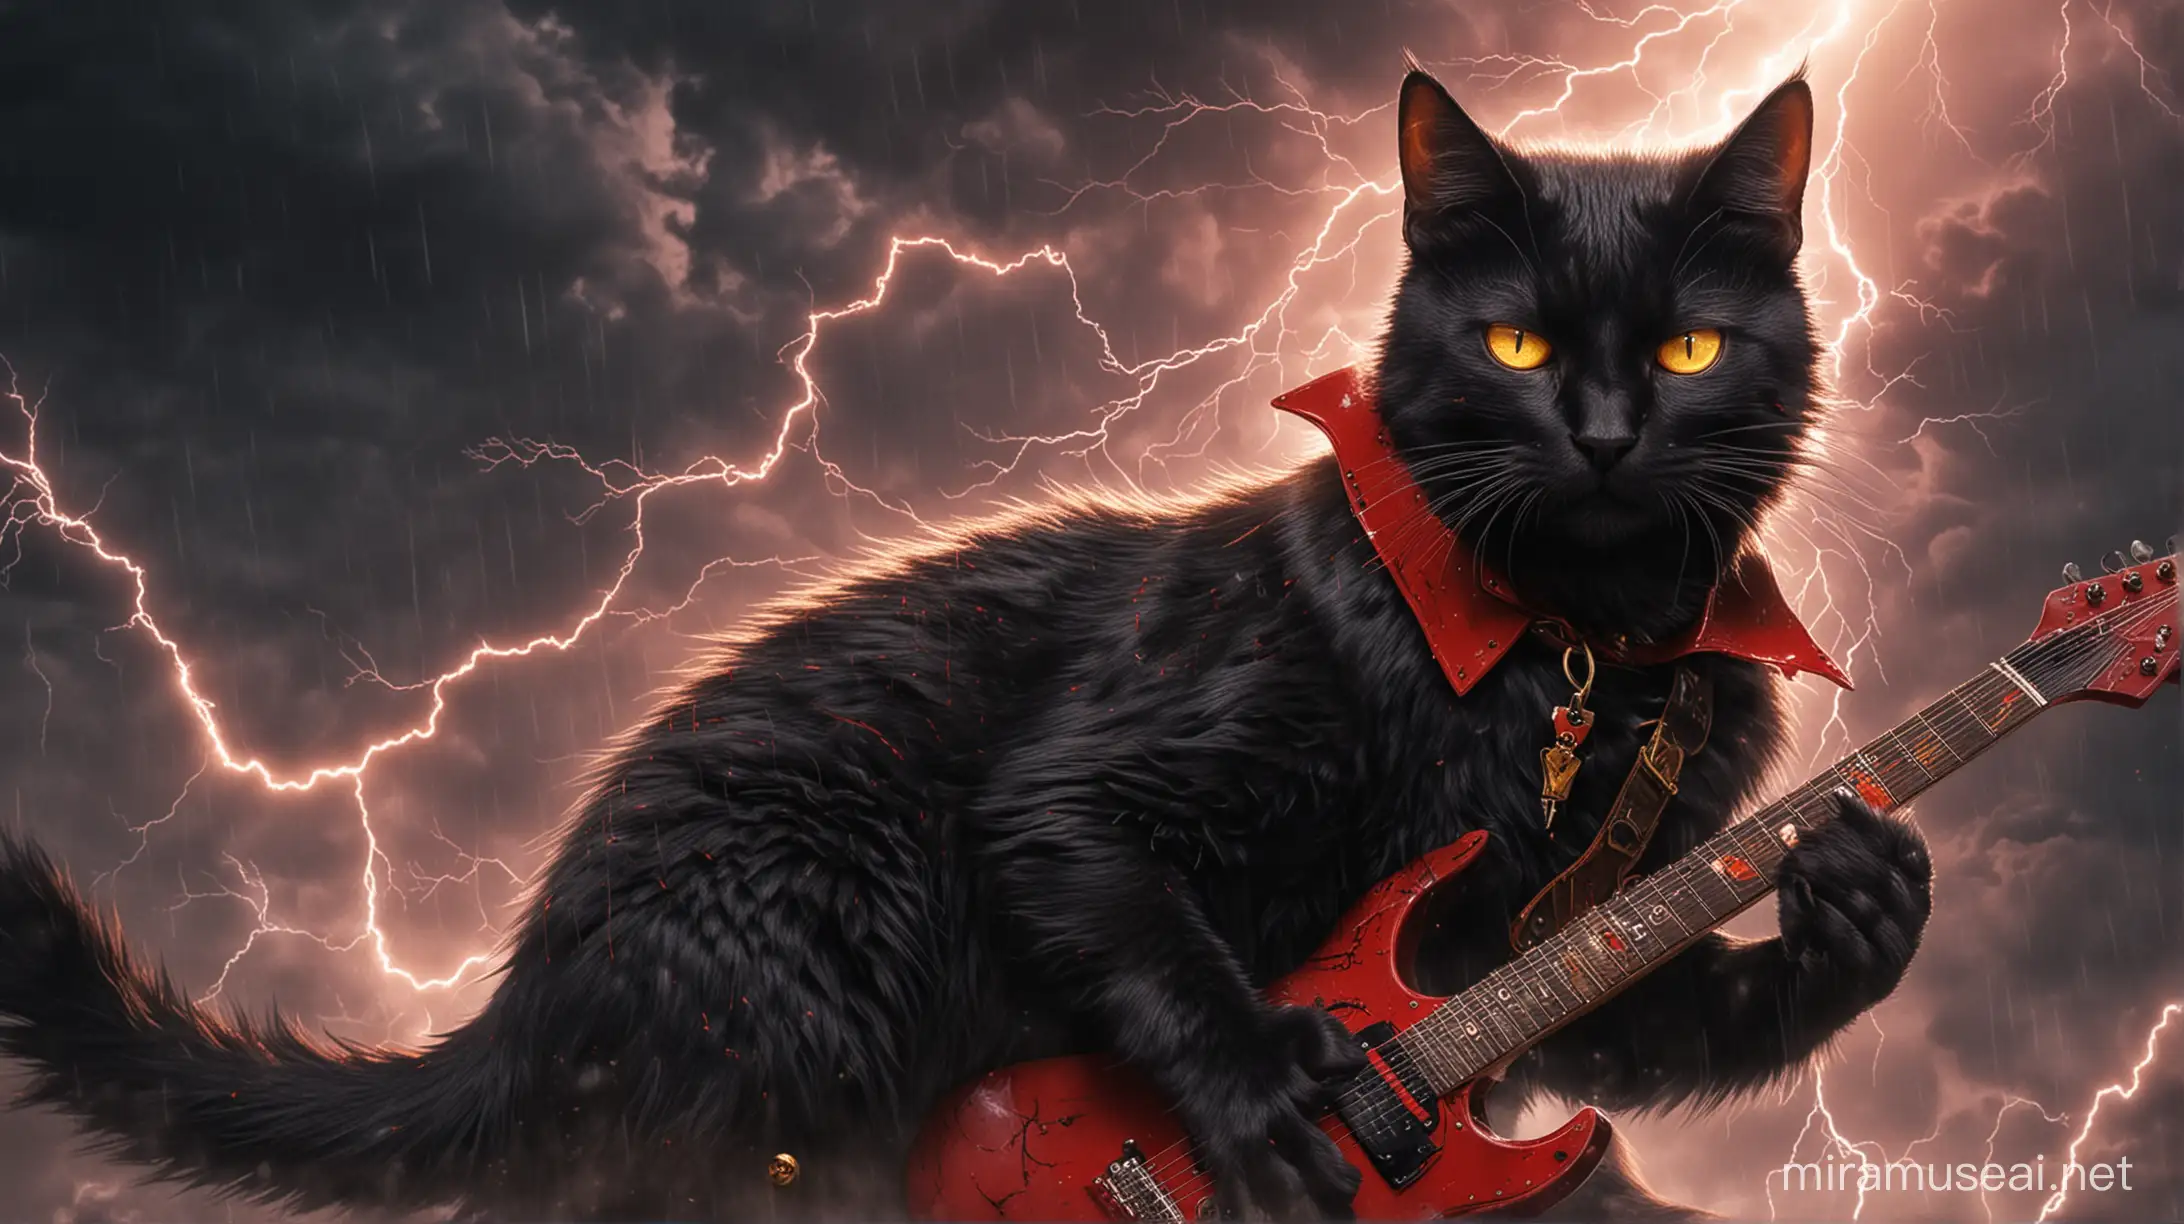 black cat, yellow eyes, red collar around the neck, hell, storm, lightning, electric guitar